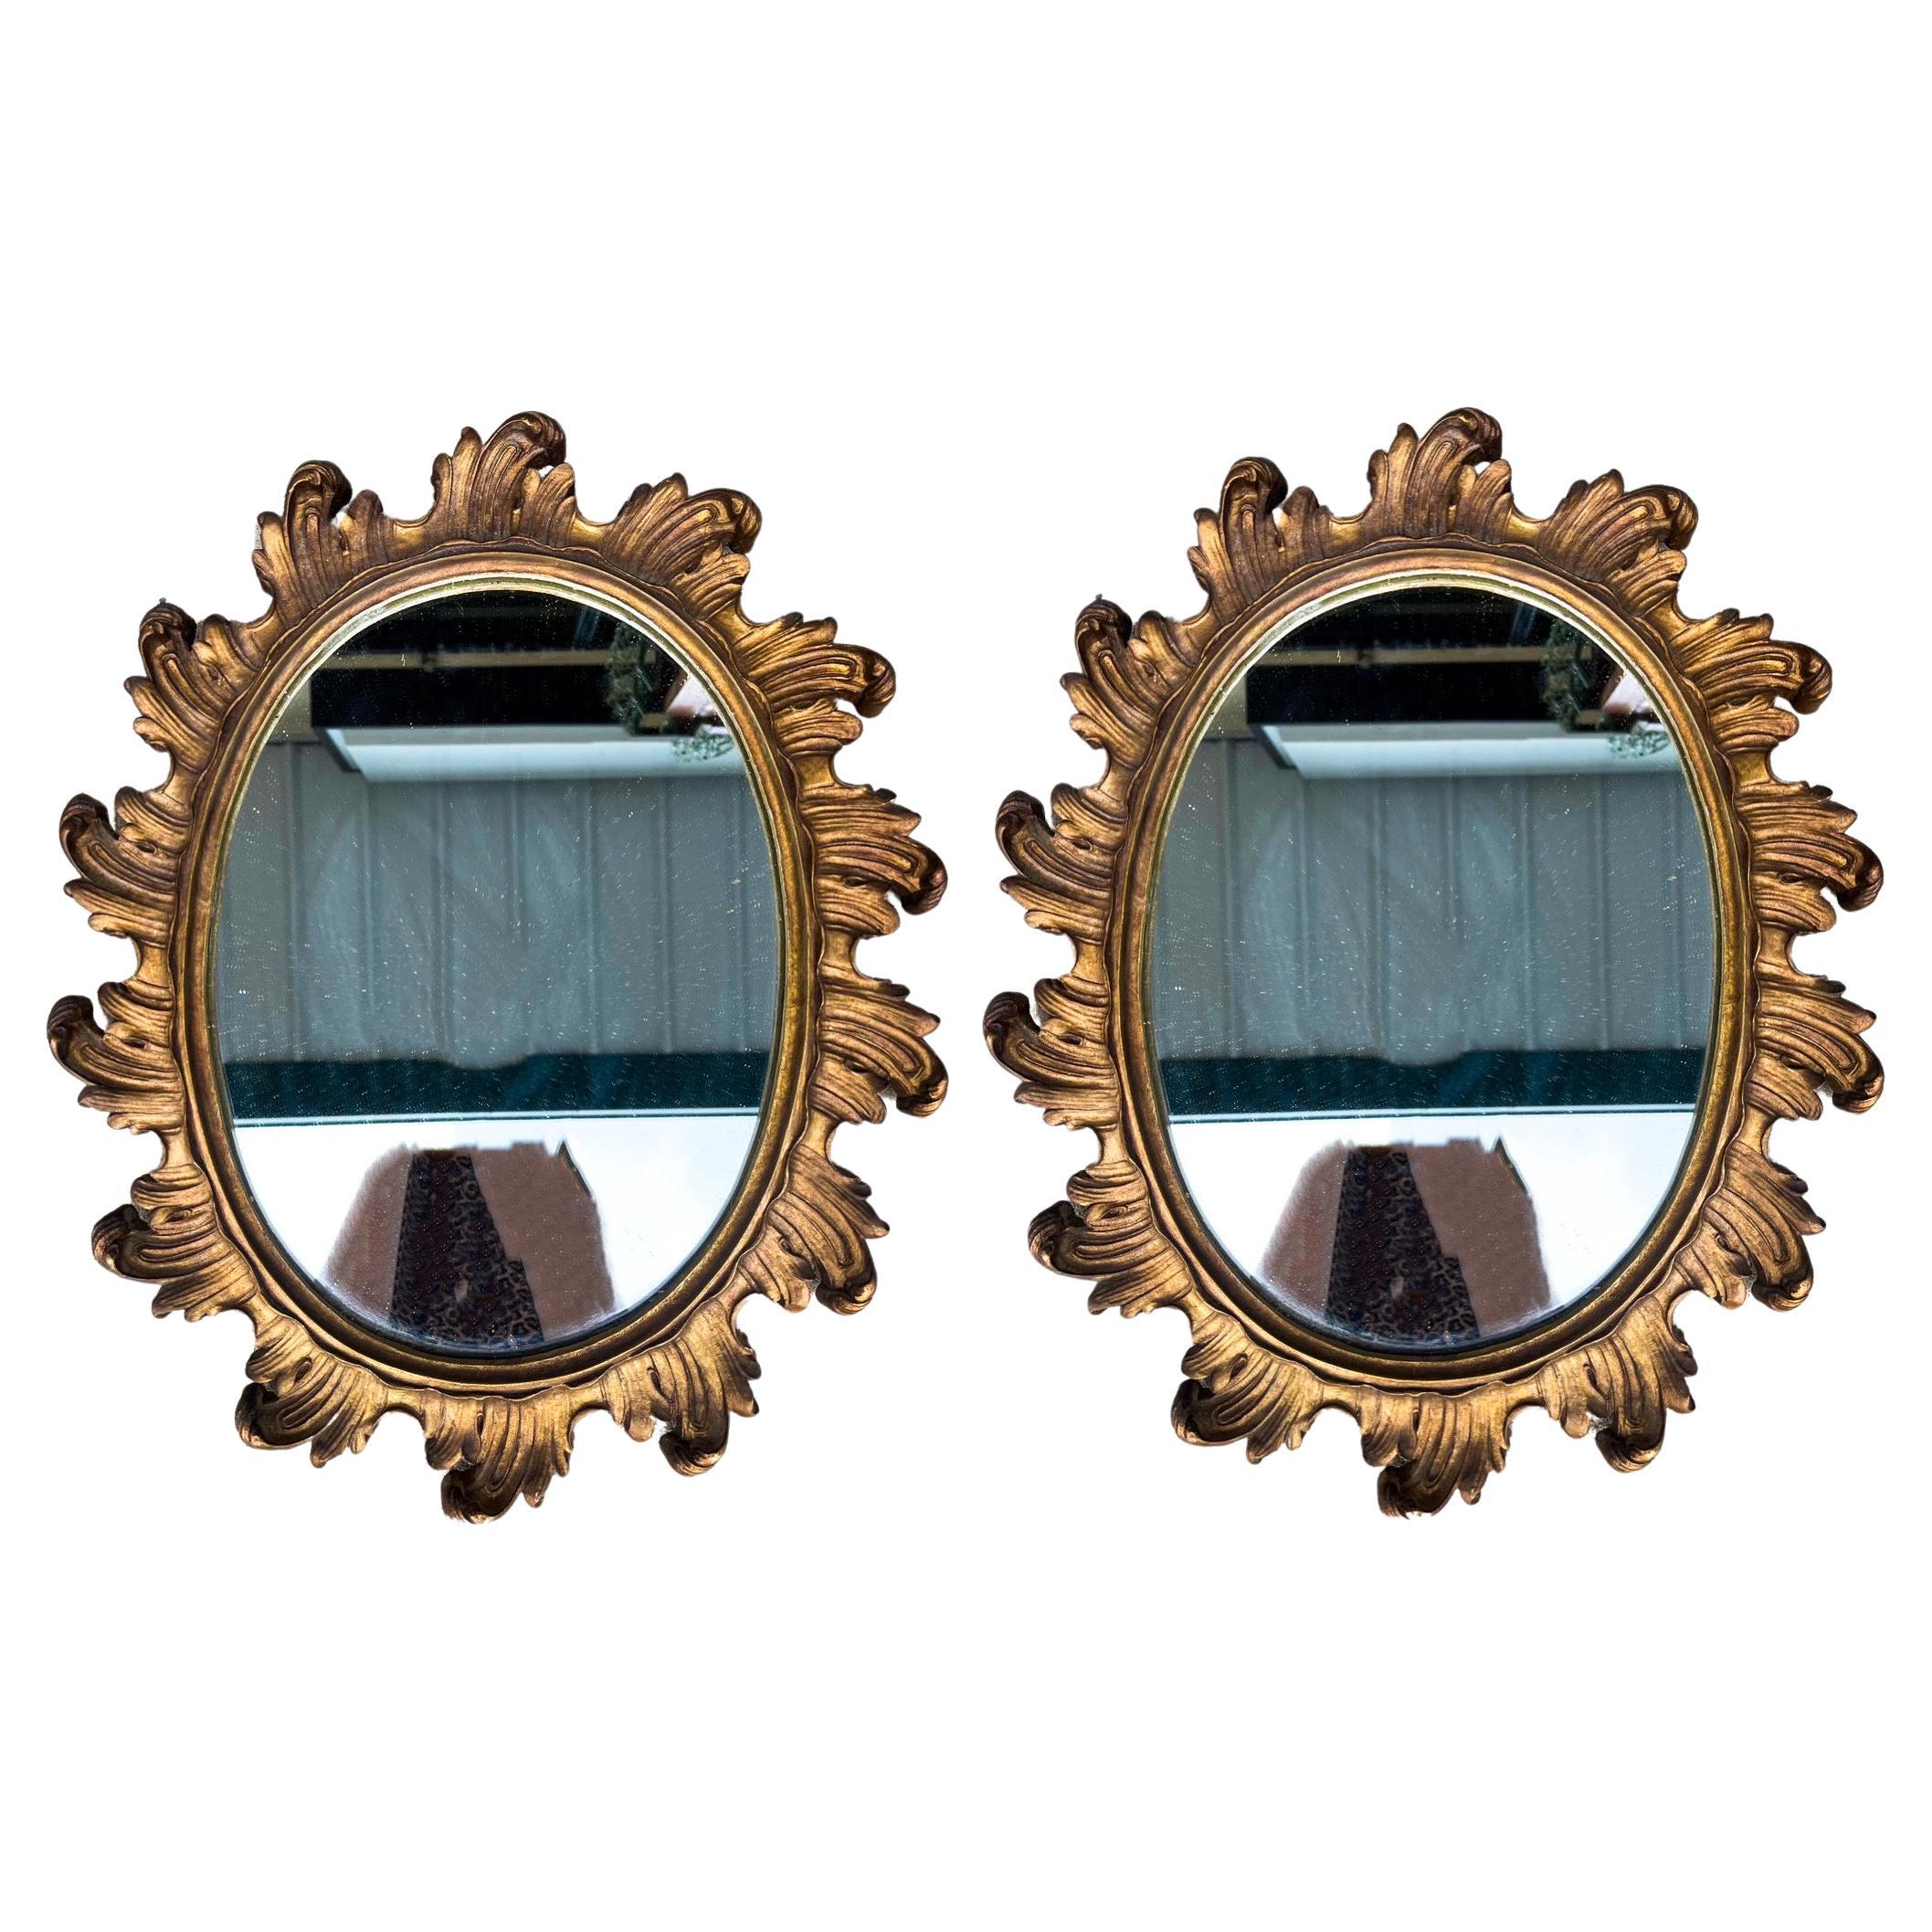 This is a nice pair of Hollywood Regency Era carved giltwood mirrors with scalloped edges. The backs are felt lined. The are unmarked and in very good condition.